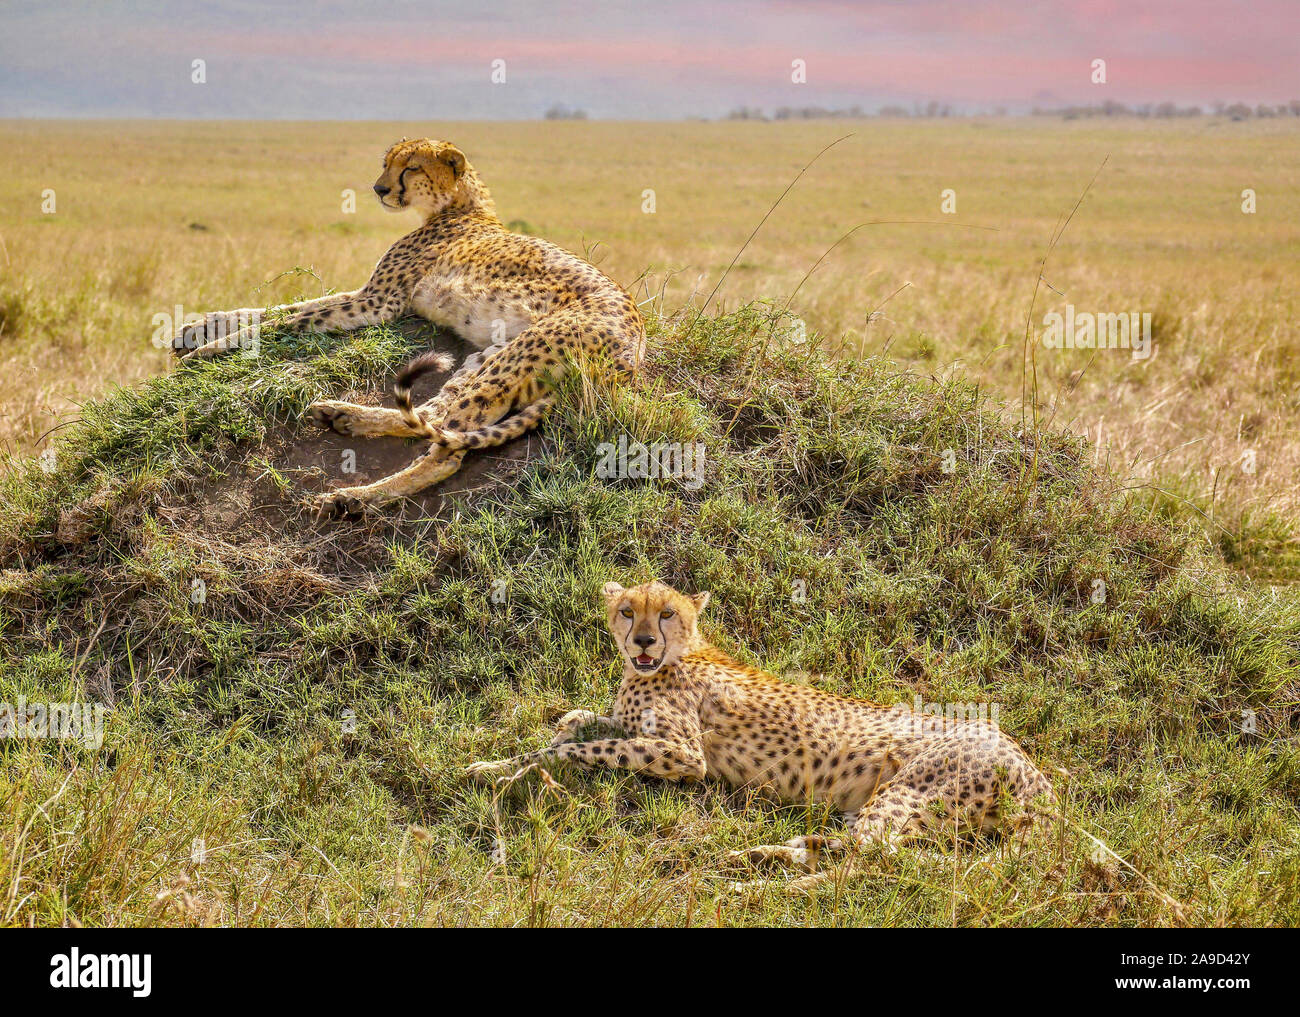 Two cheetah brothers relaxing on a grassy mound during the day, in the Masai Mara, Kenya. Stock Photo